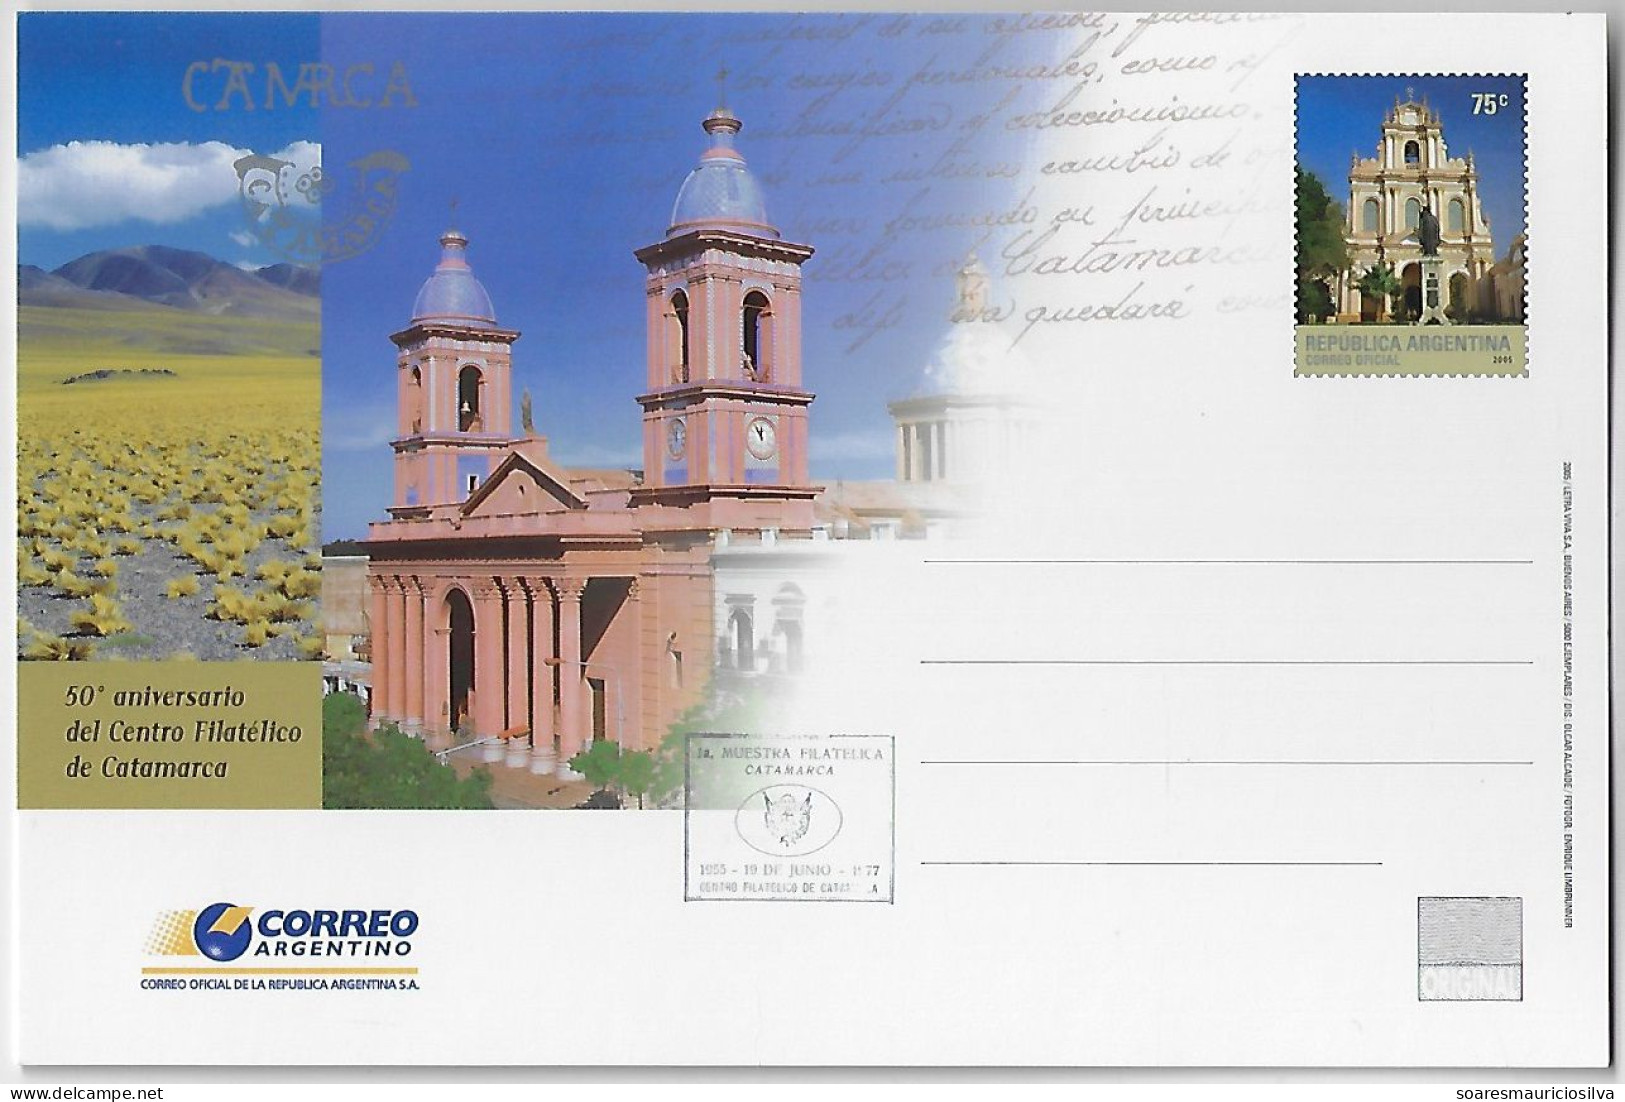 Argentina 2005 Postal Stationery Card 50 Years Catamarca Philatelic Center Basilica Cathedral Of Our Lady Of The Valley - Postal Stationery